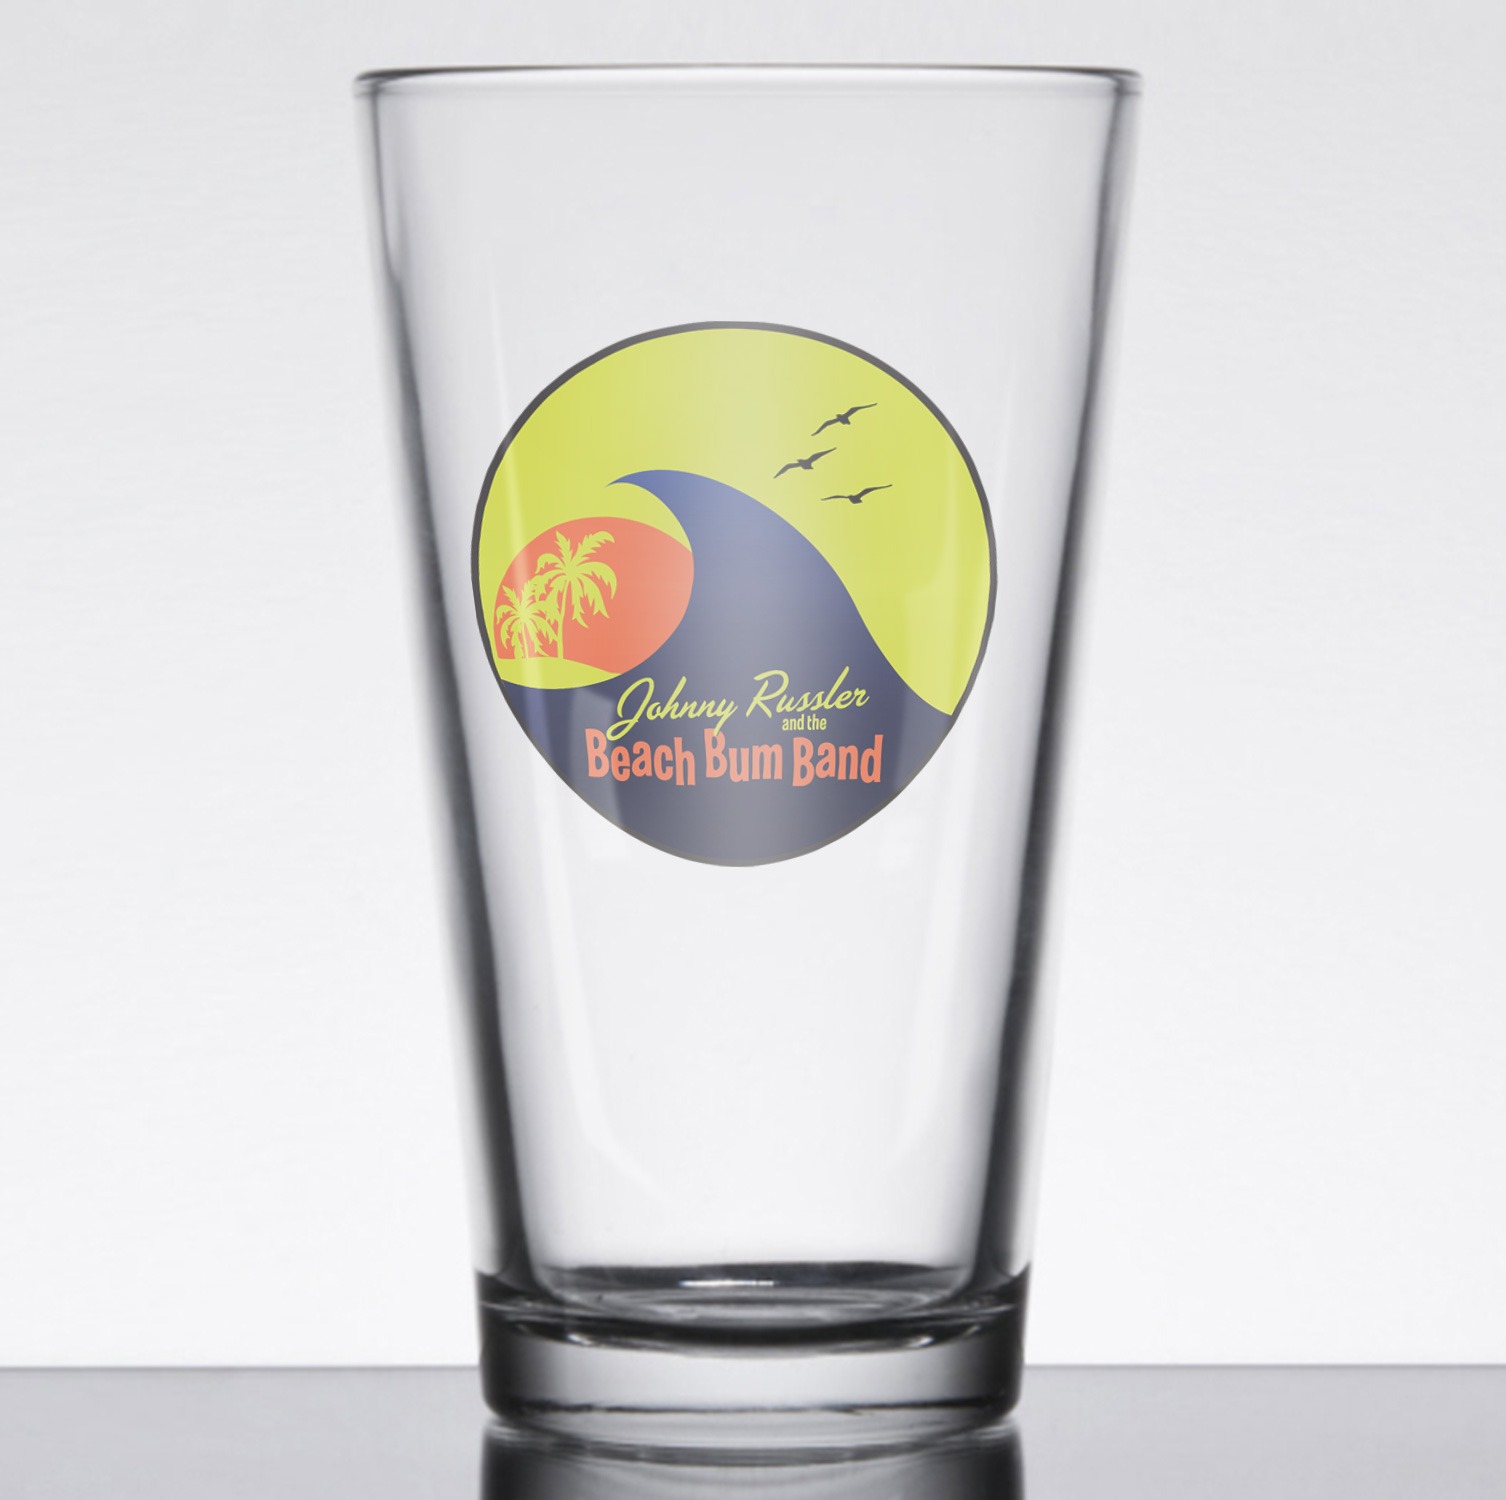 Johnny Russler and the Beach Bum Band Logo Pint Glass, The Troprock Shop